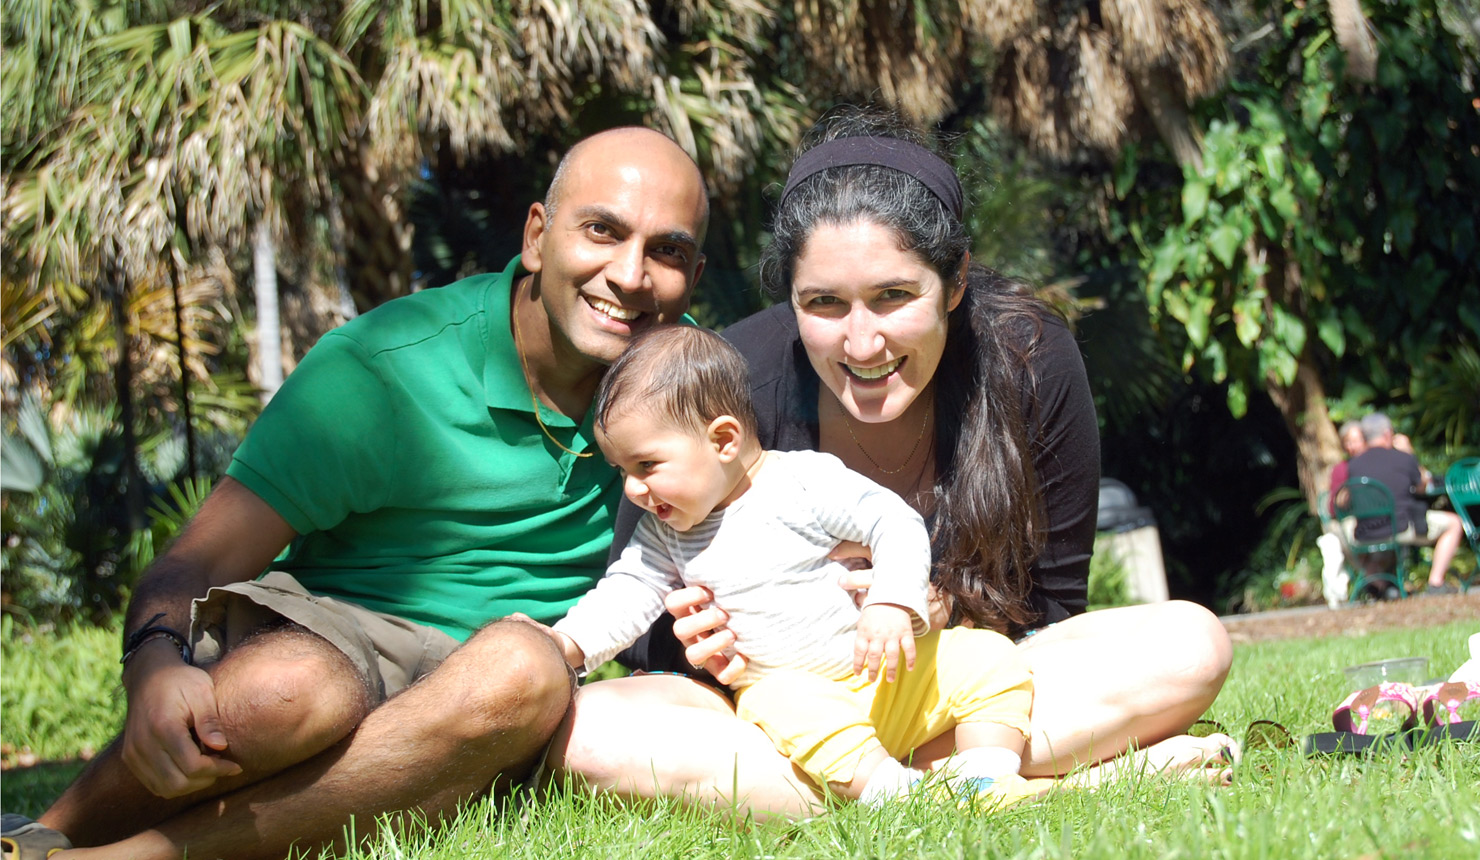 Samir Soneji with his wife, Valerie Lewis, who is also an assistant professor at TDI, and their 9-month old daughter.